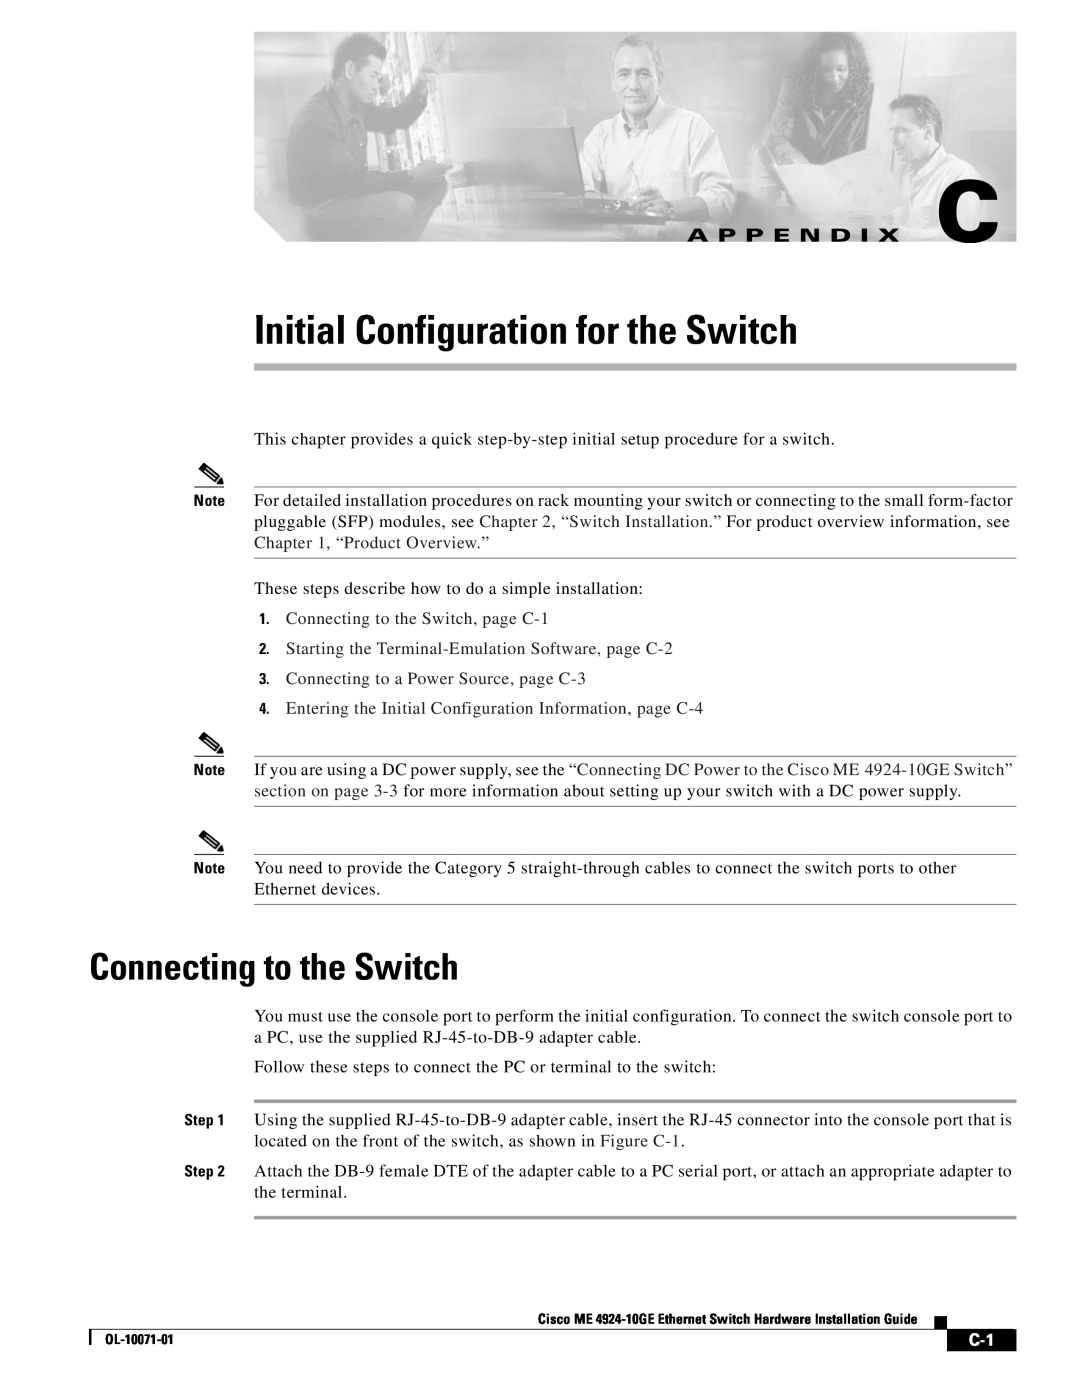 Cisco Systems ME 4924-10GE manual Initial Configuration for the Switch, Connecting to the Switch, A P P E N D I X C 